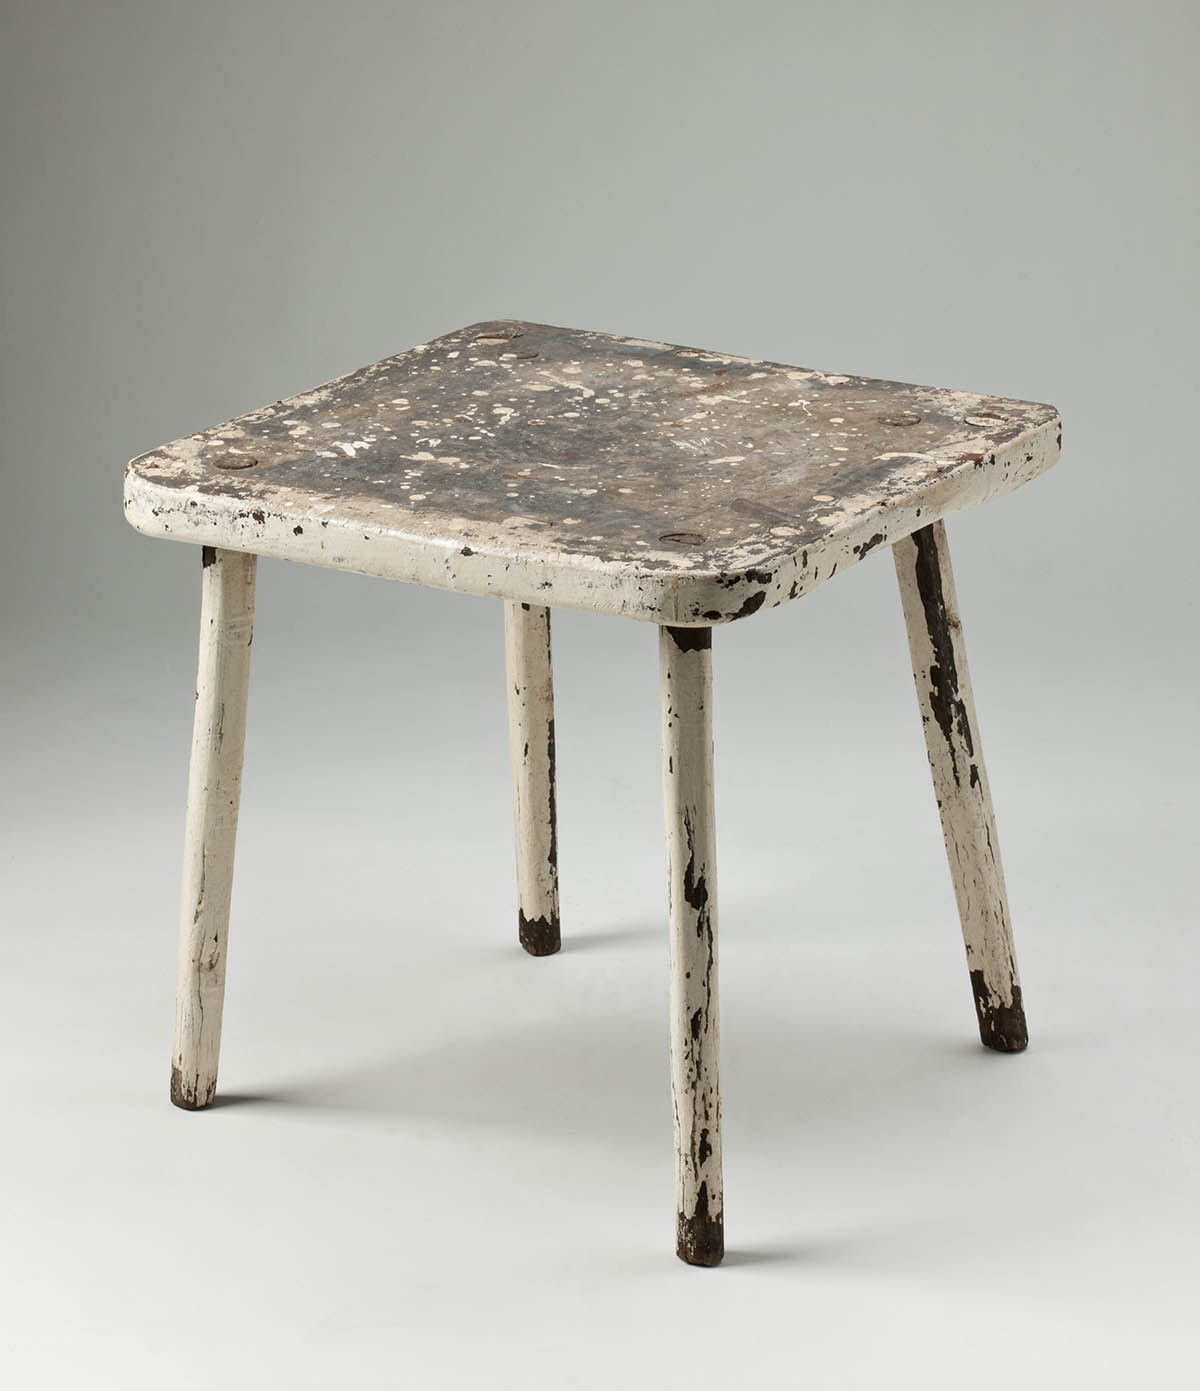 Wooden stool, painted cream, with four legs and a square seat. - click to view larger image